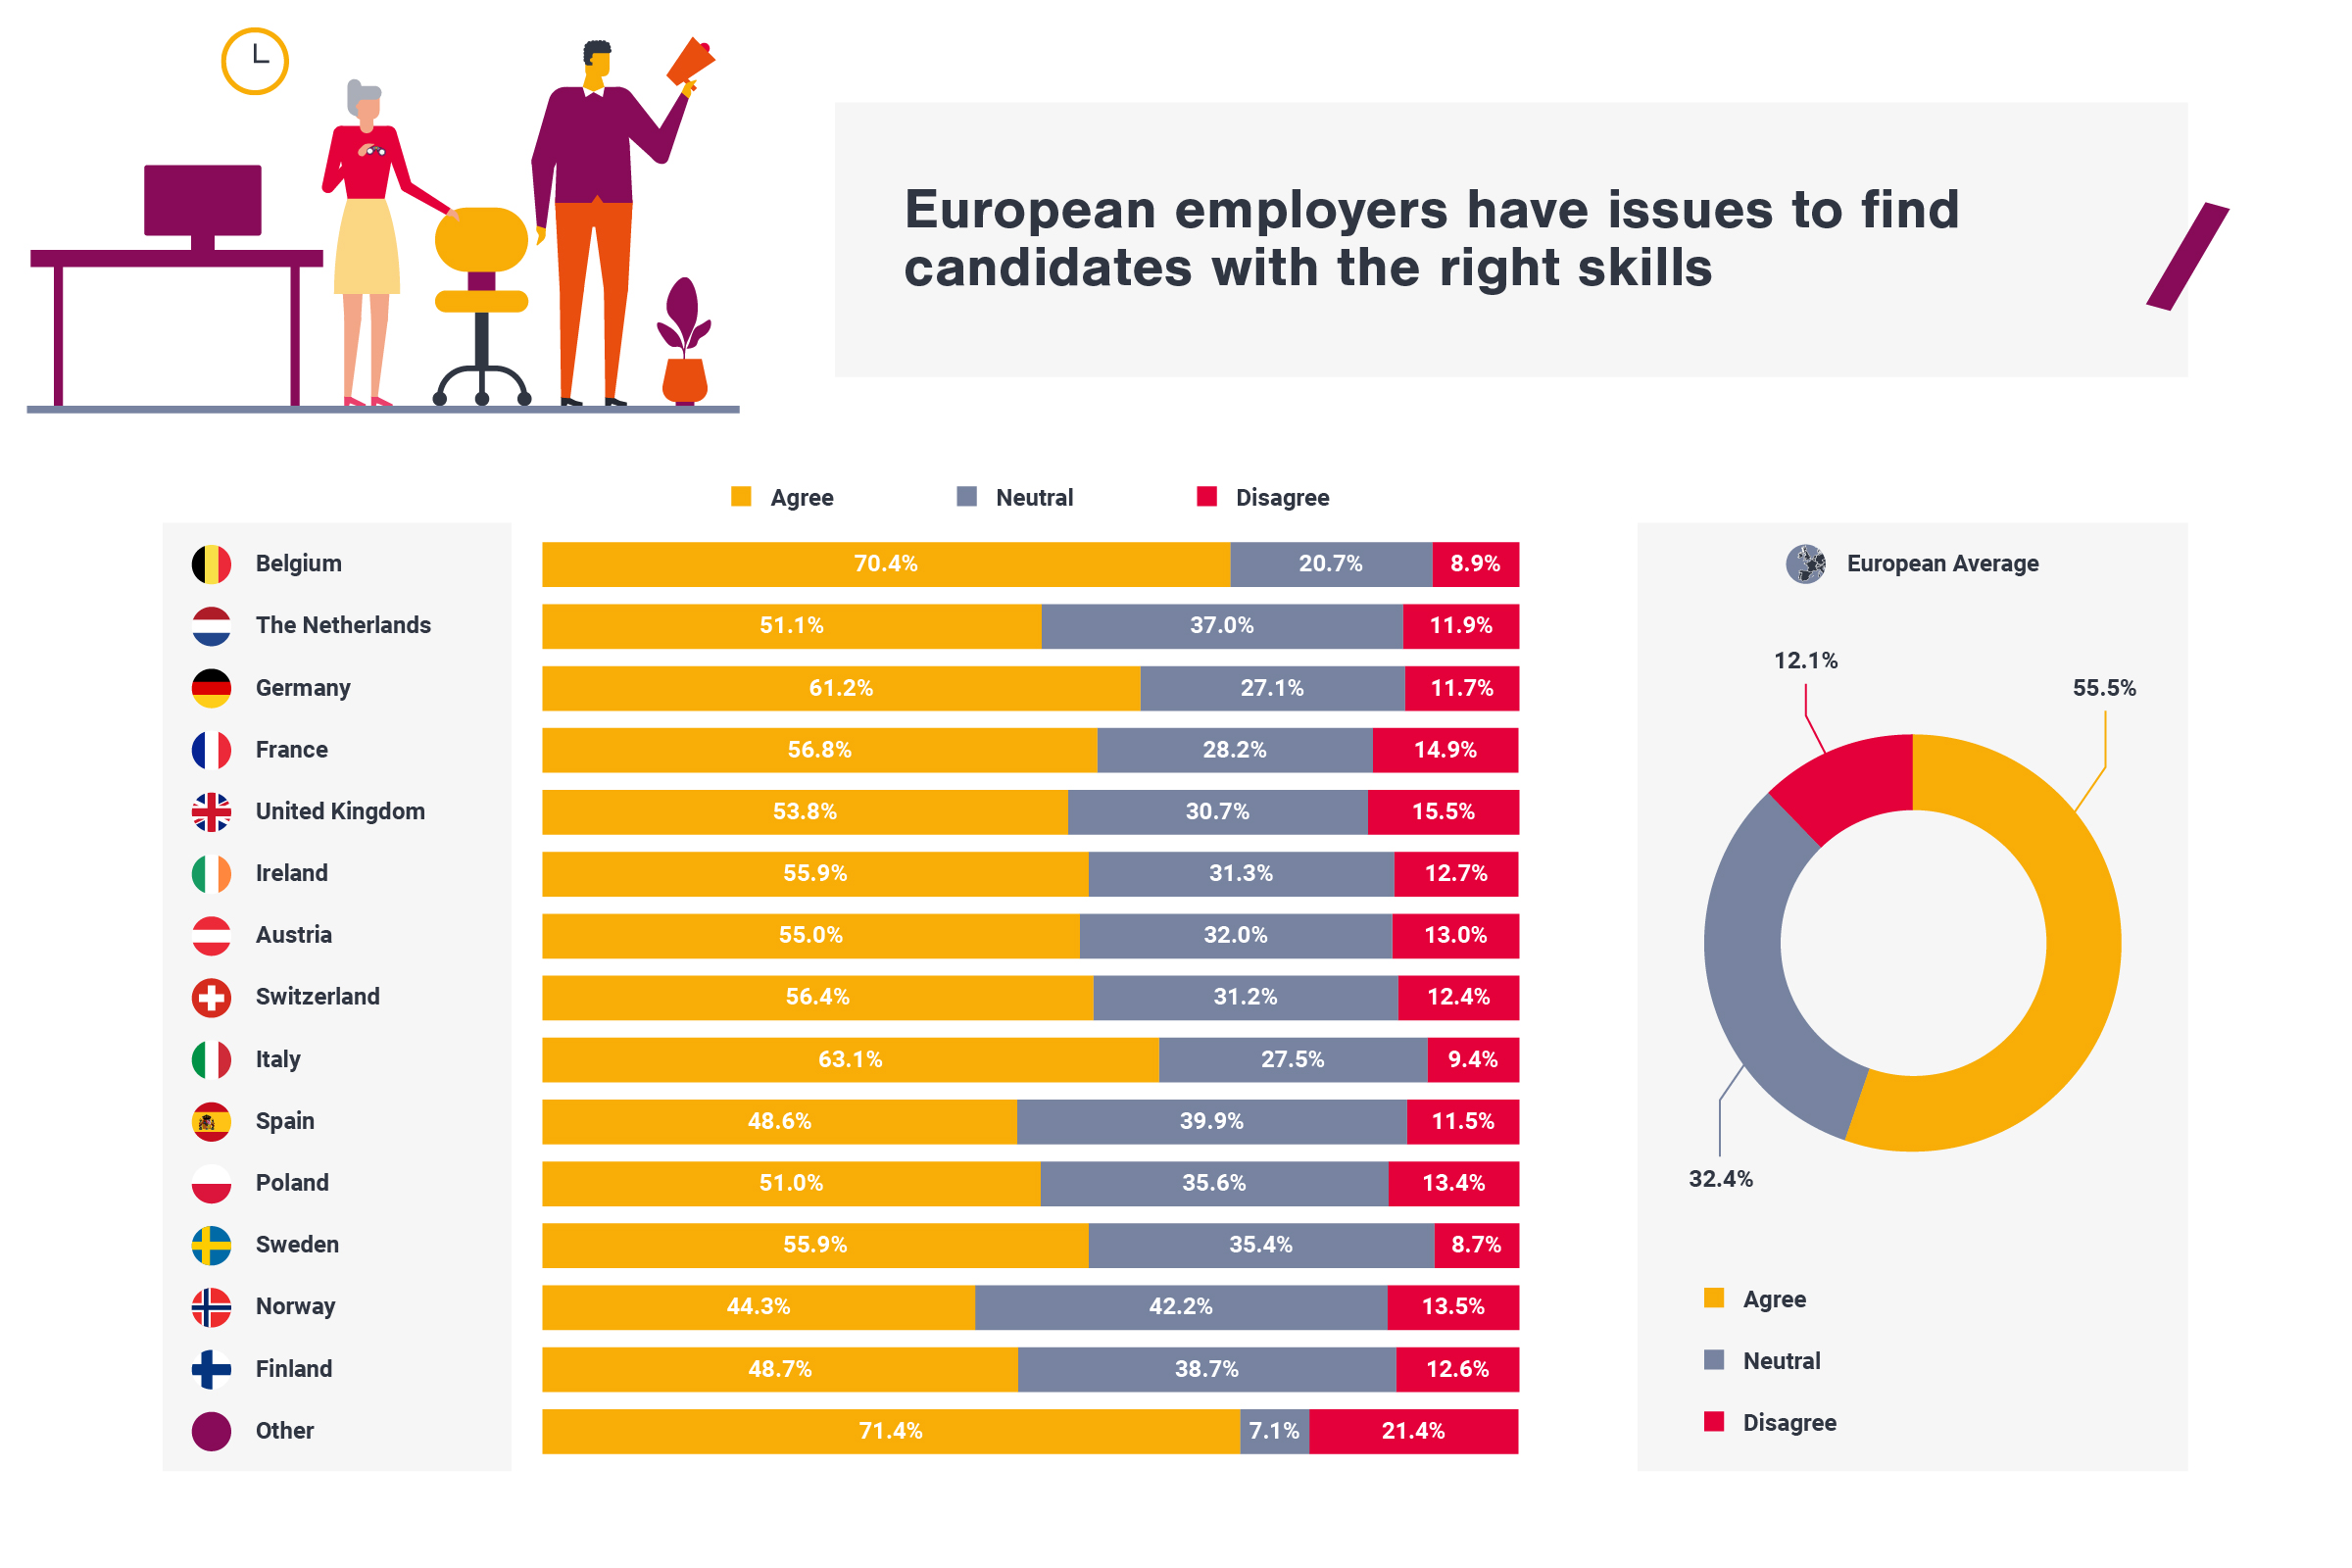 European employers have issues to find candidates